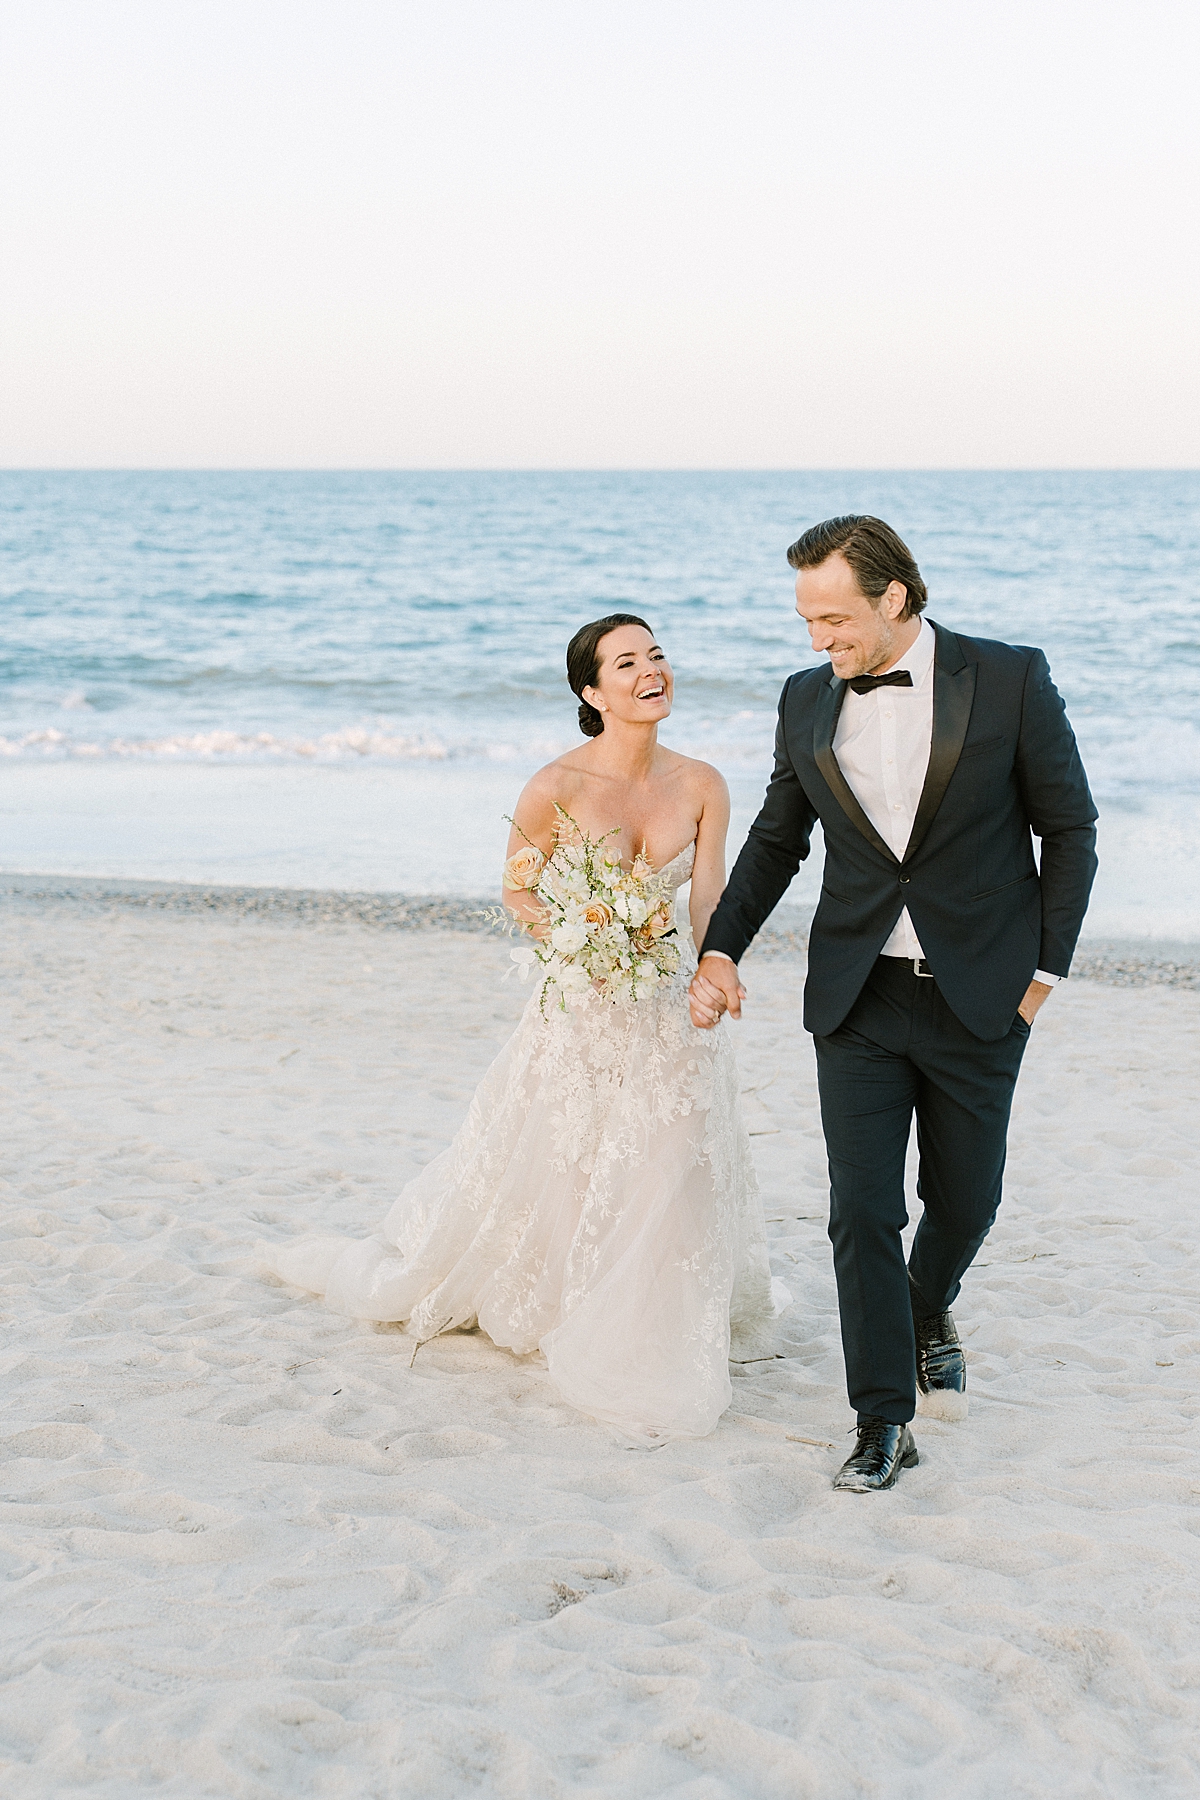 A bride and groom frolic on the beach during their luxury beach wedding on film.